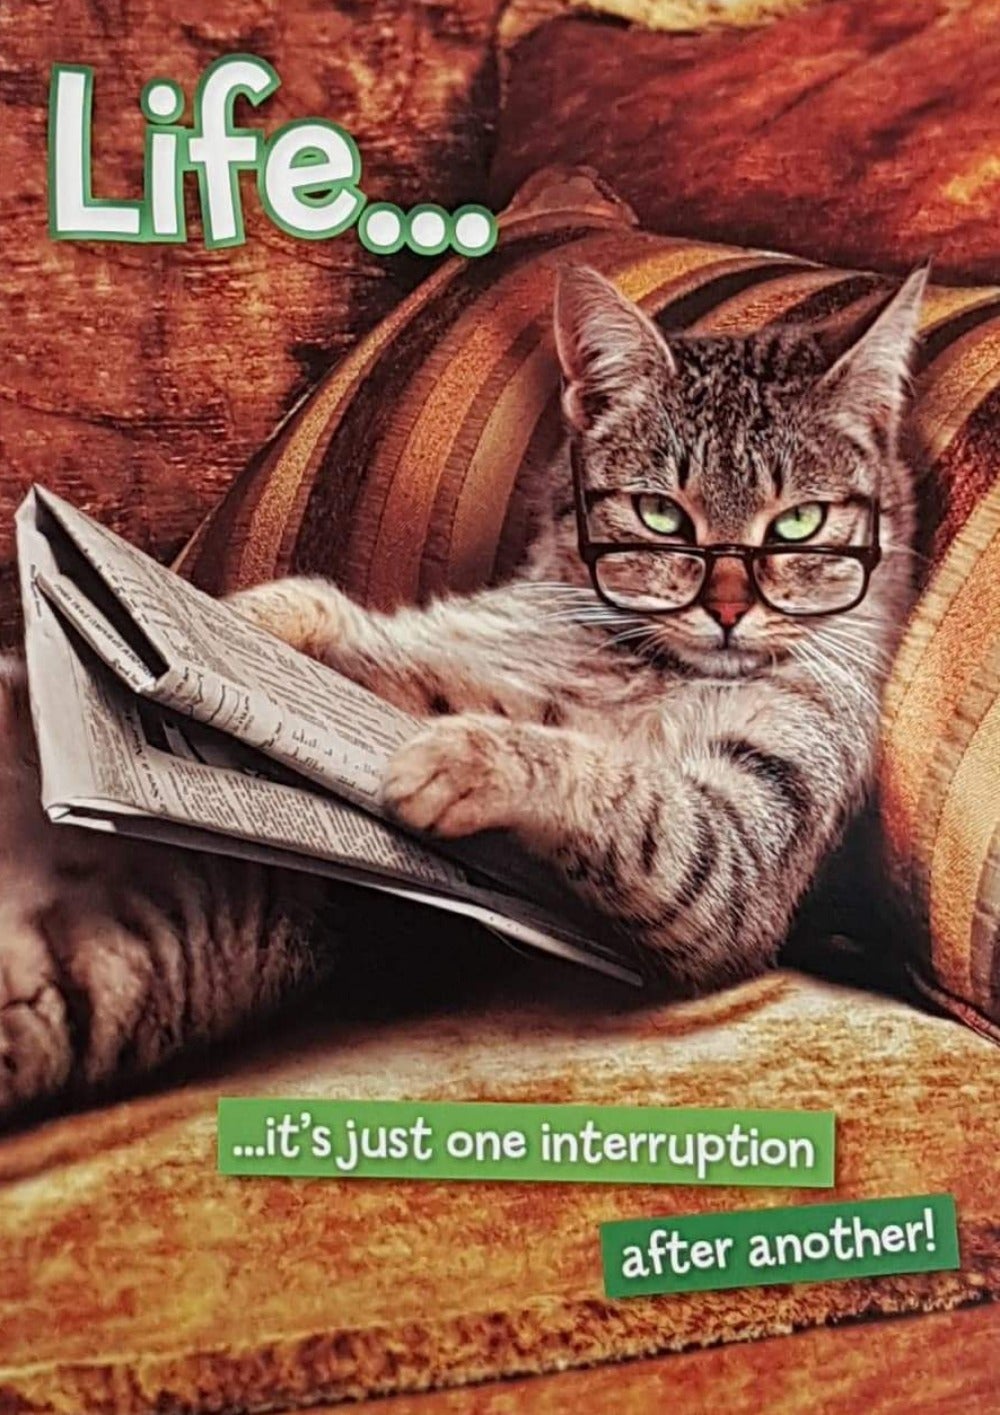 Humour Card - Cat Wearing Glasses Reading Newspaper & Giving An Advice